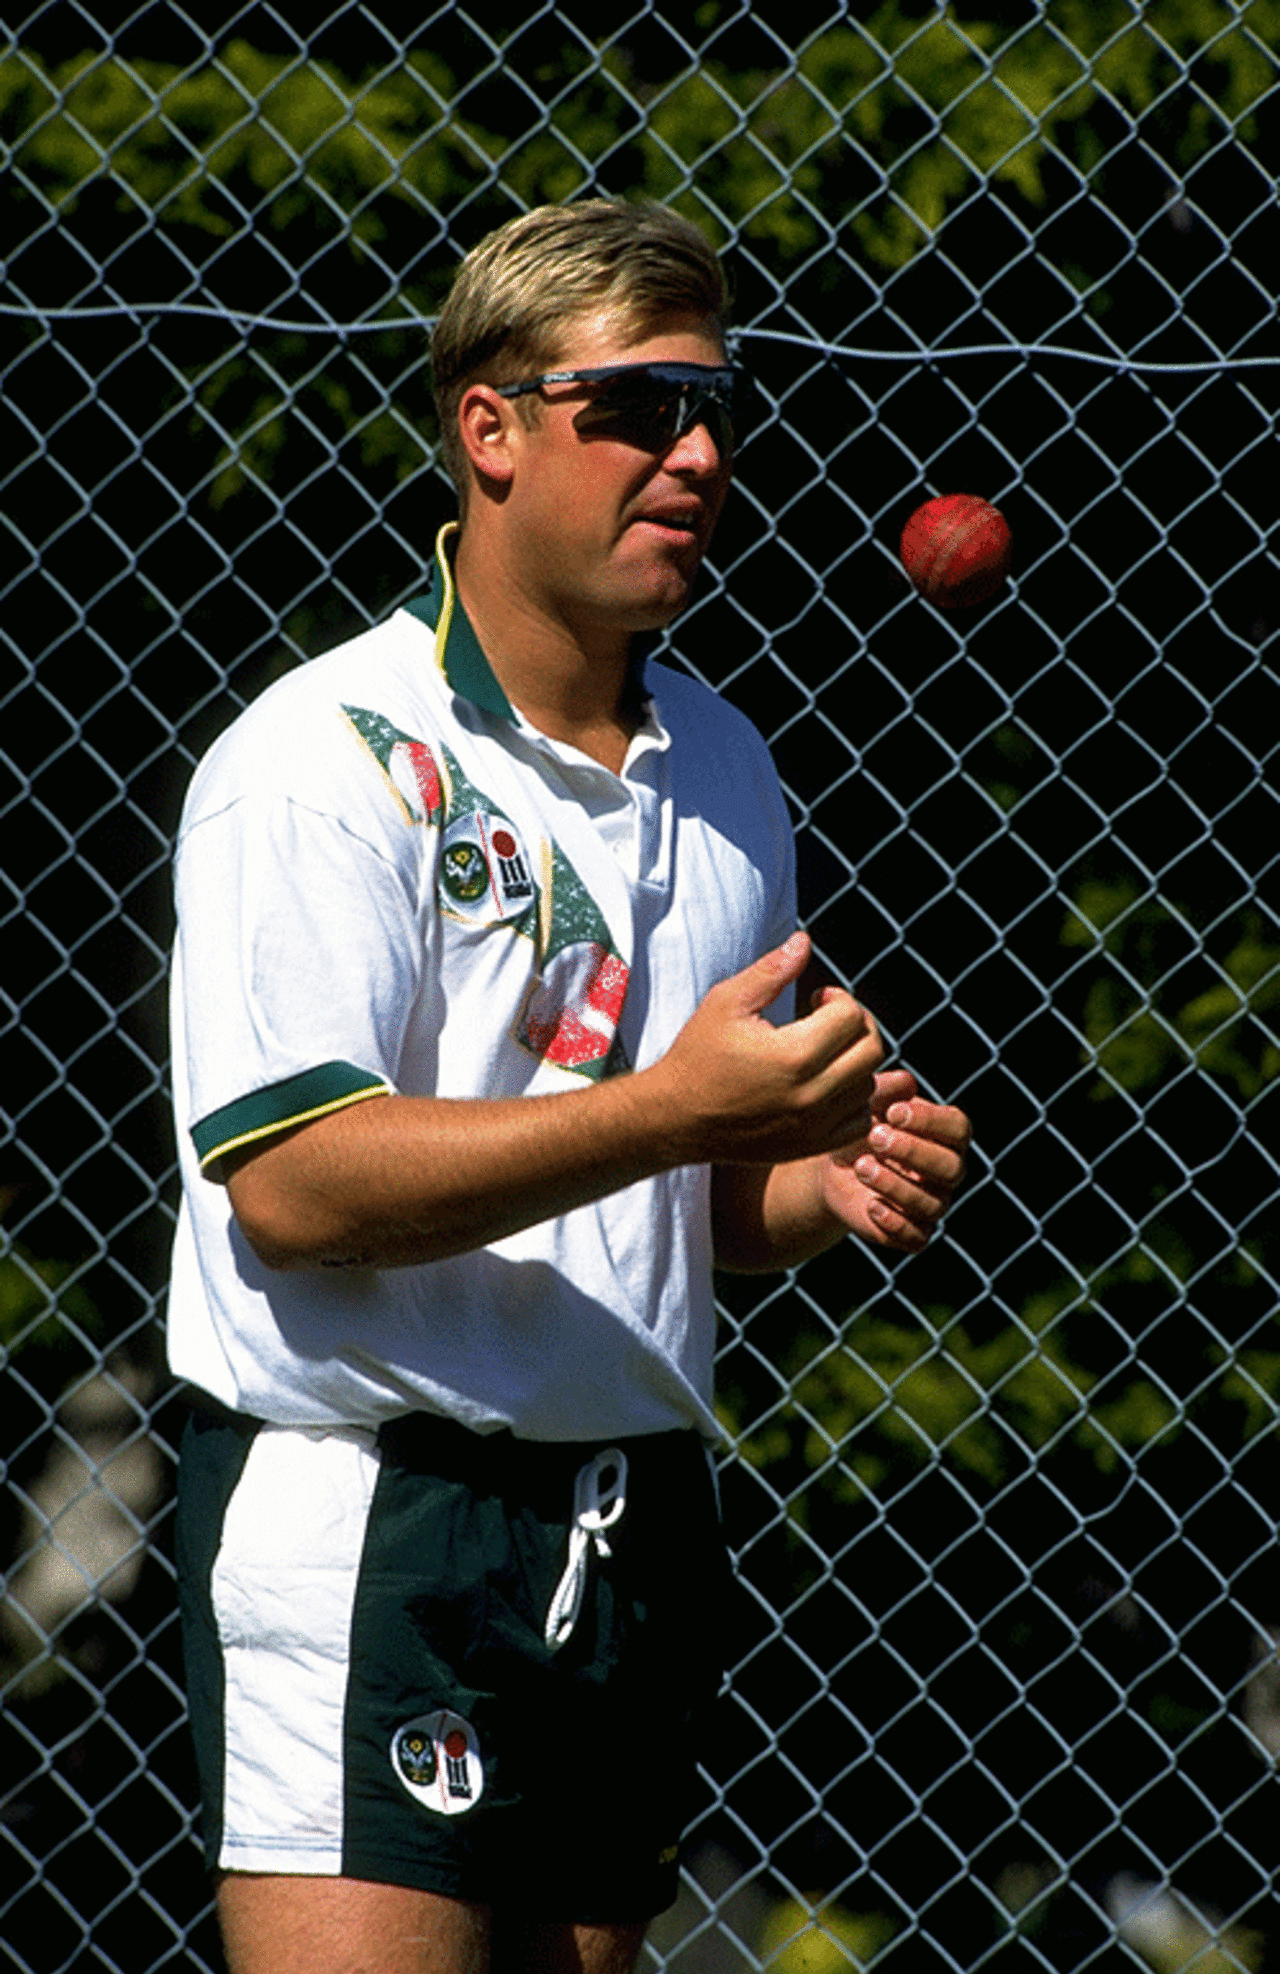 Shane Warne during a training session, December 1, 1990